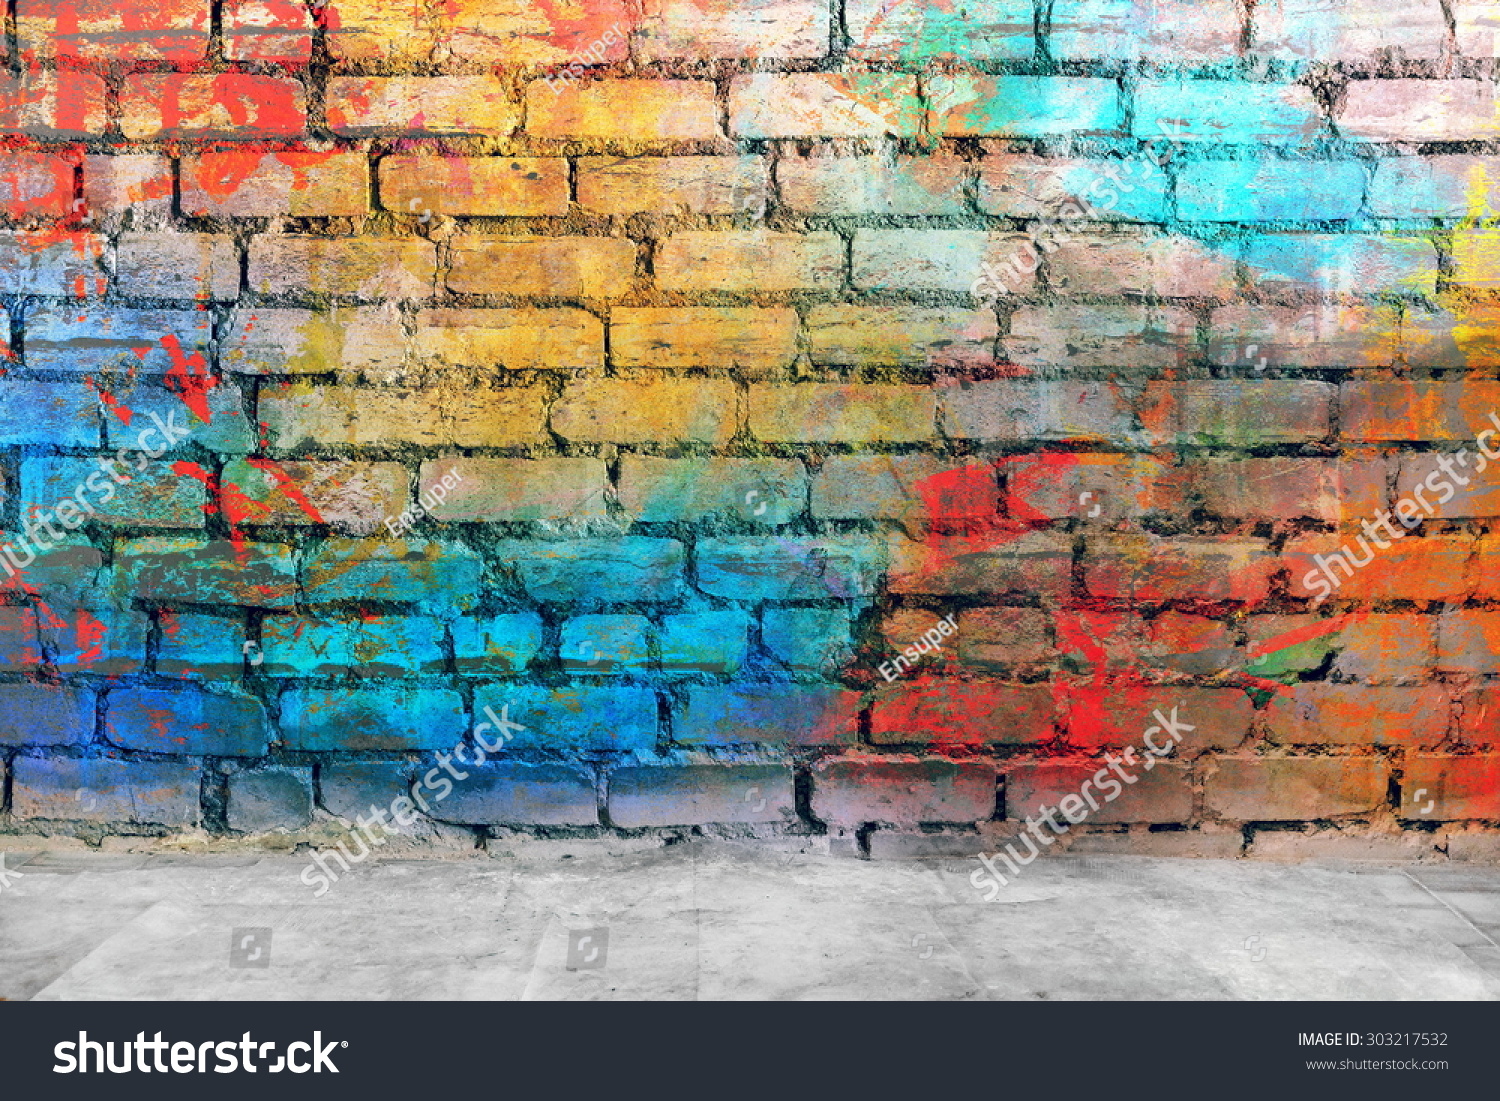 40,459 Graffiti brick wall colorful background Images, Stock Photos ...